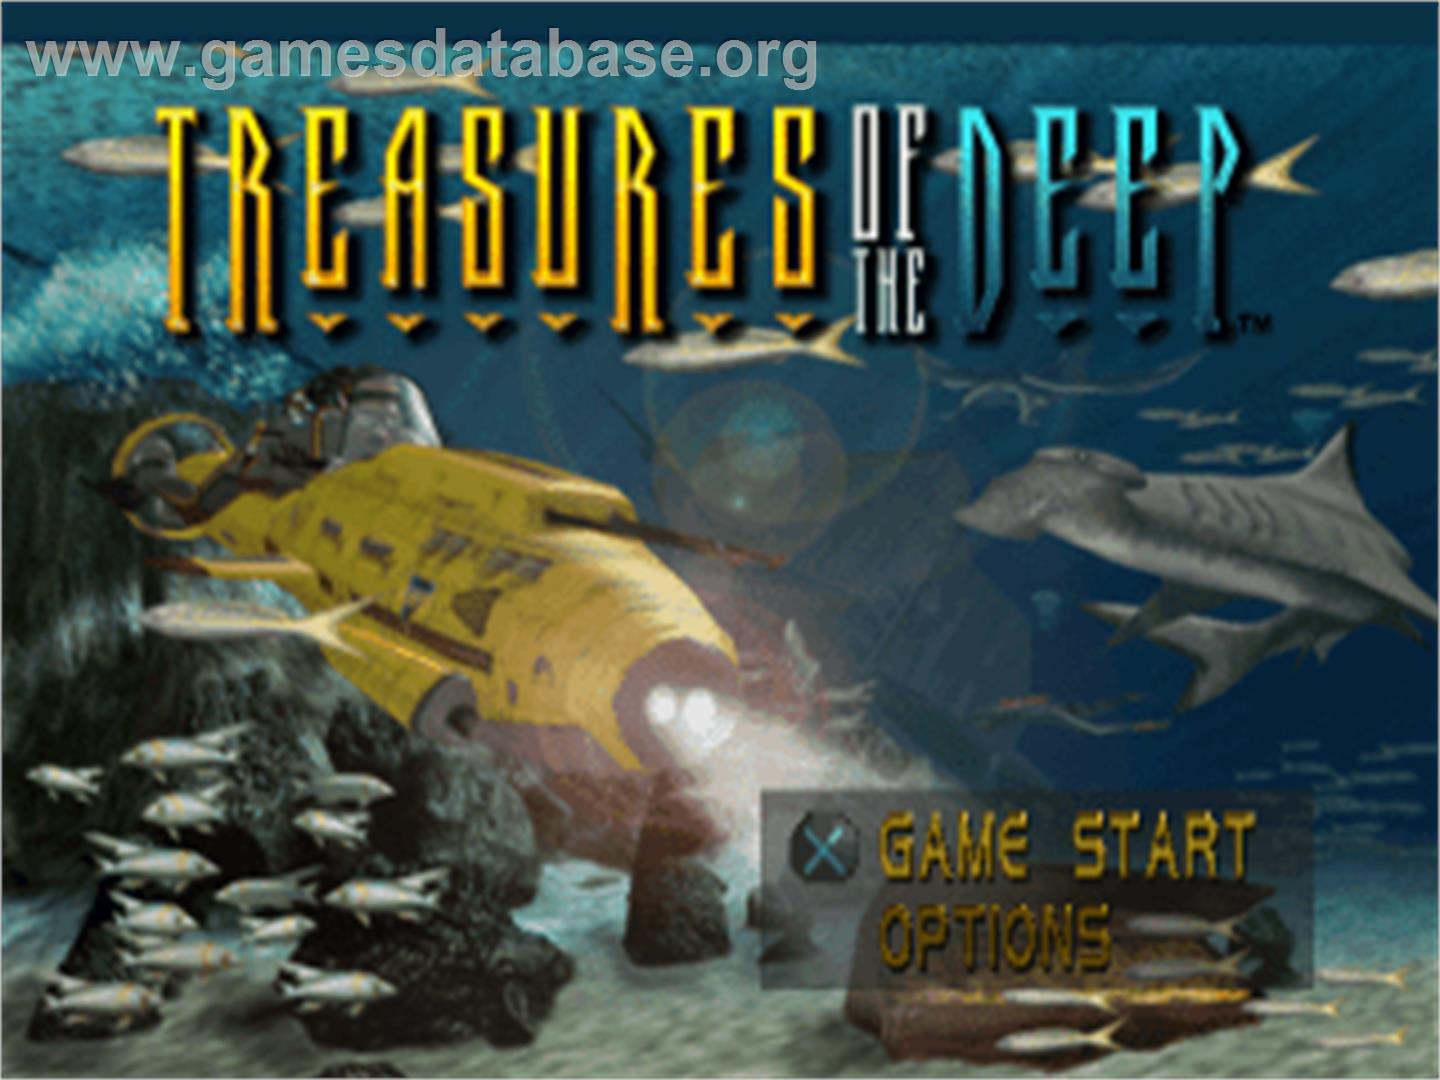 Treasures of the Deep - Sony Playstation - Artwork - Title Screen